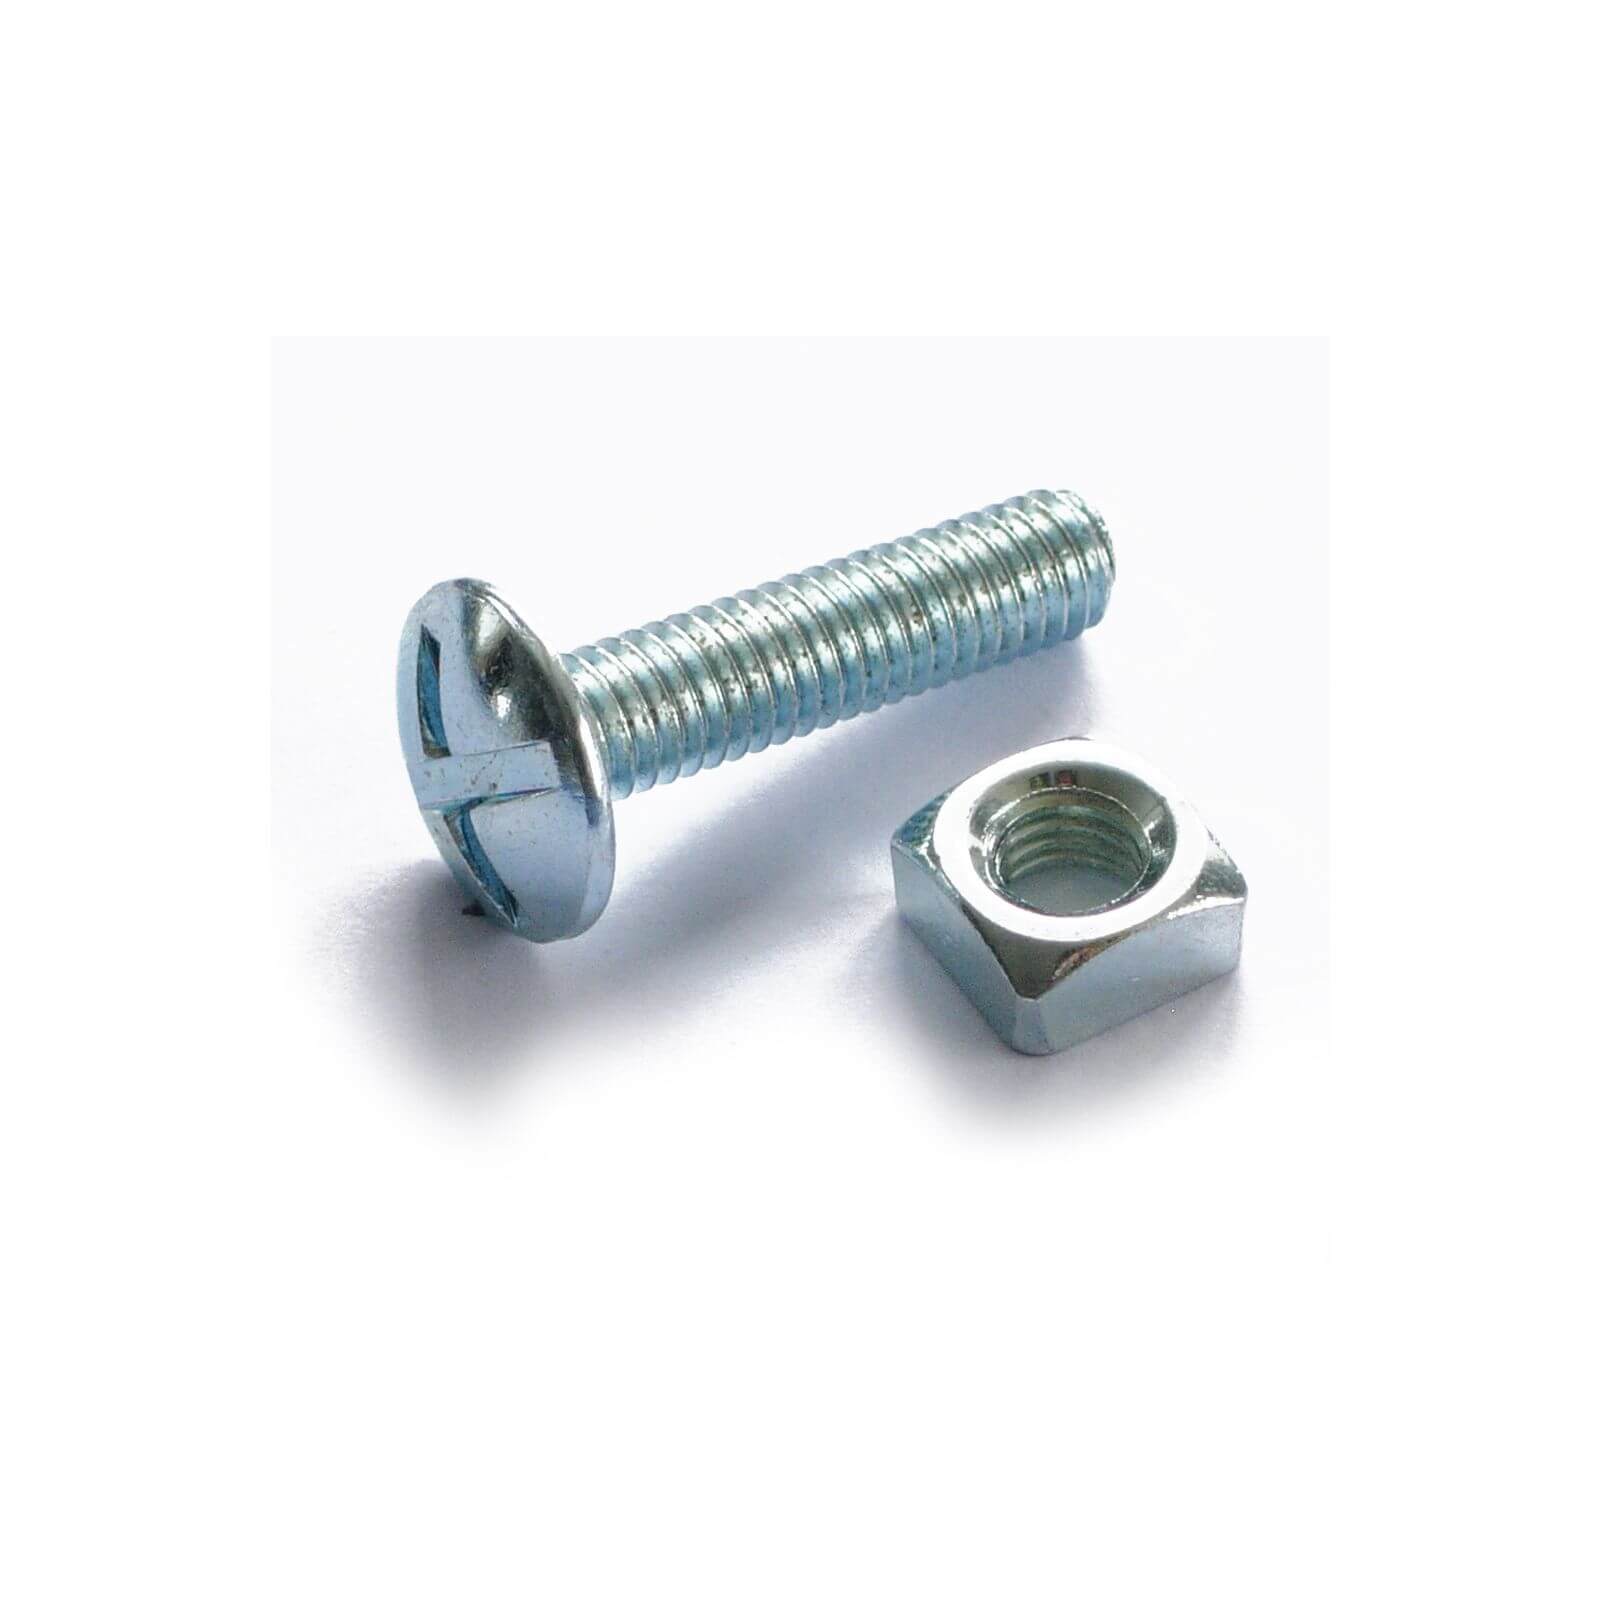 Roofing Bolt - Bright Zinc Plated - M8 100mm - 5 Pack